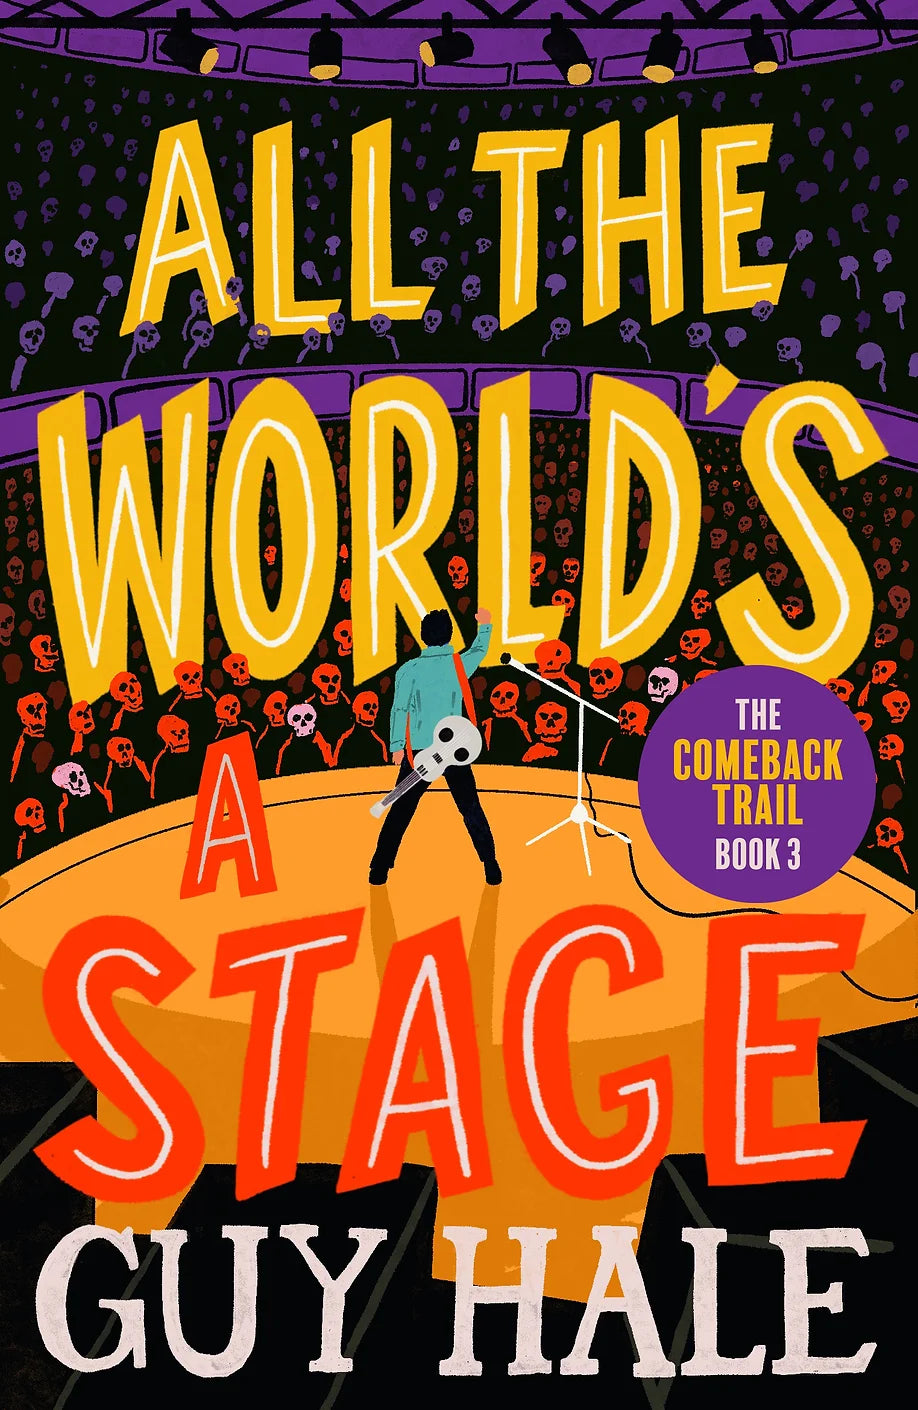 All The World's A Stage - Guy Hale - Paperback Edition